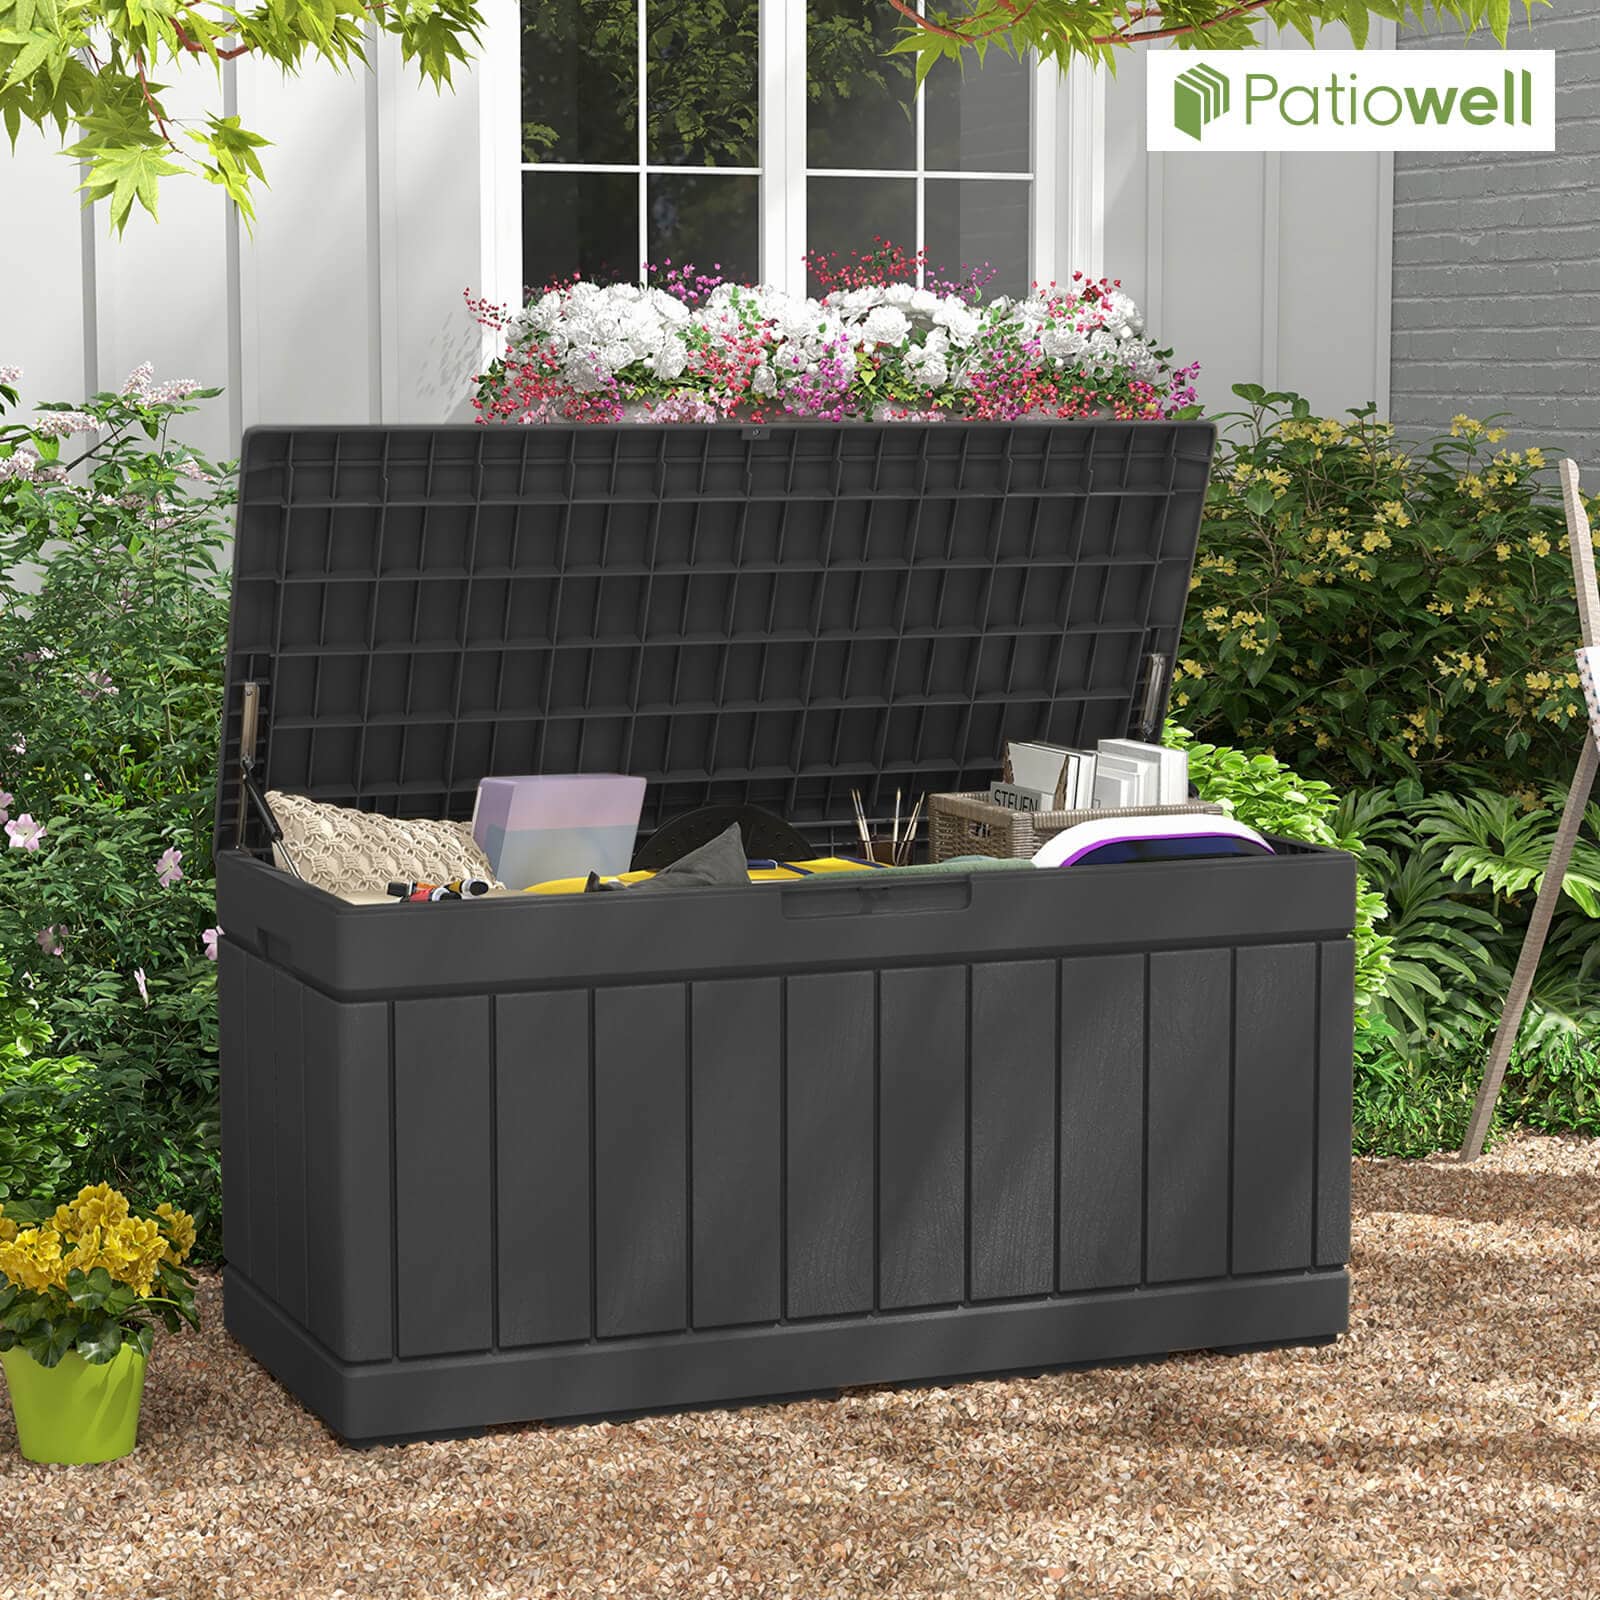 Patiowell 46.4-in L x 20.8-in 82-Gallons Black Plastic Deck Box in the ...